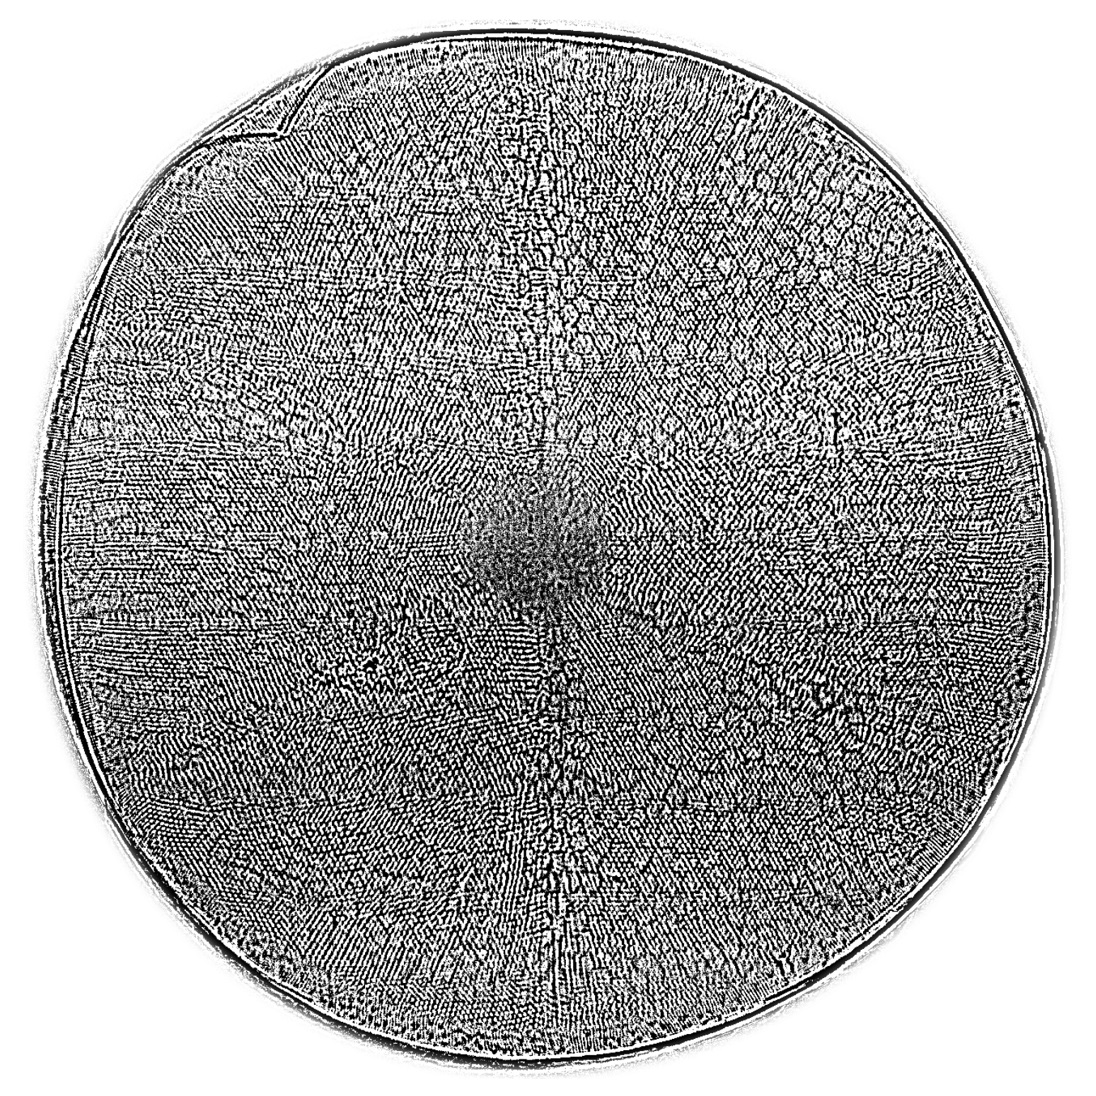 The silica shell of the diatom Actinoptychus senarius, measuring only 0.1 mm across